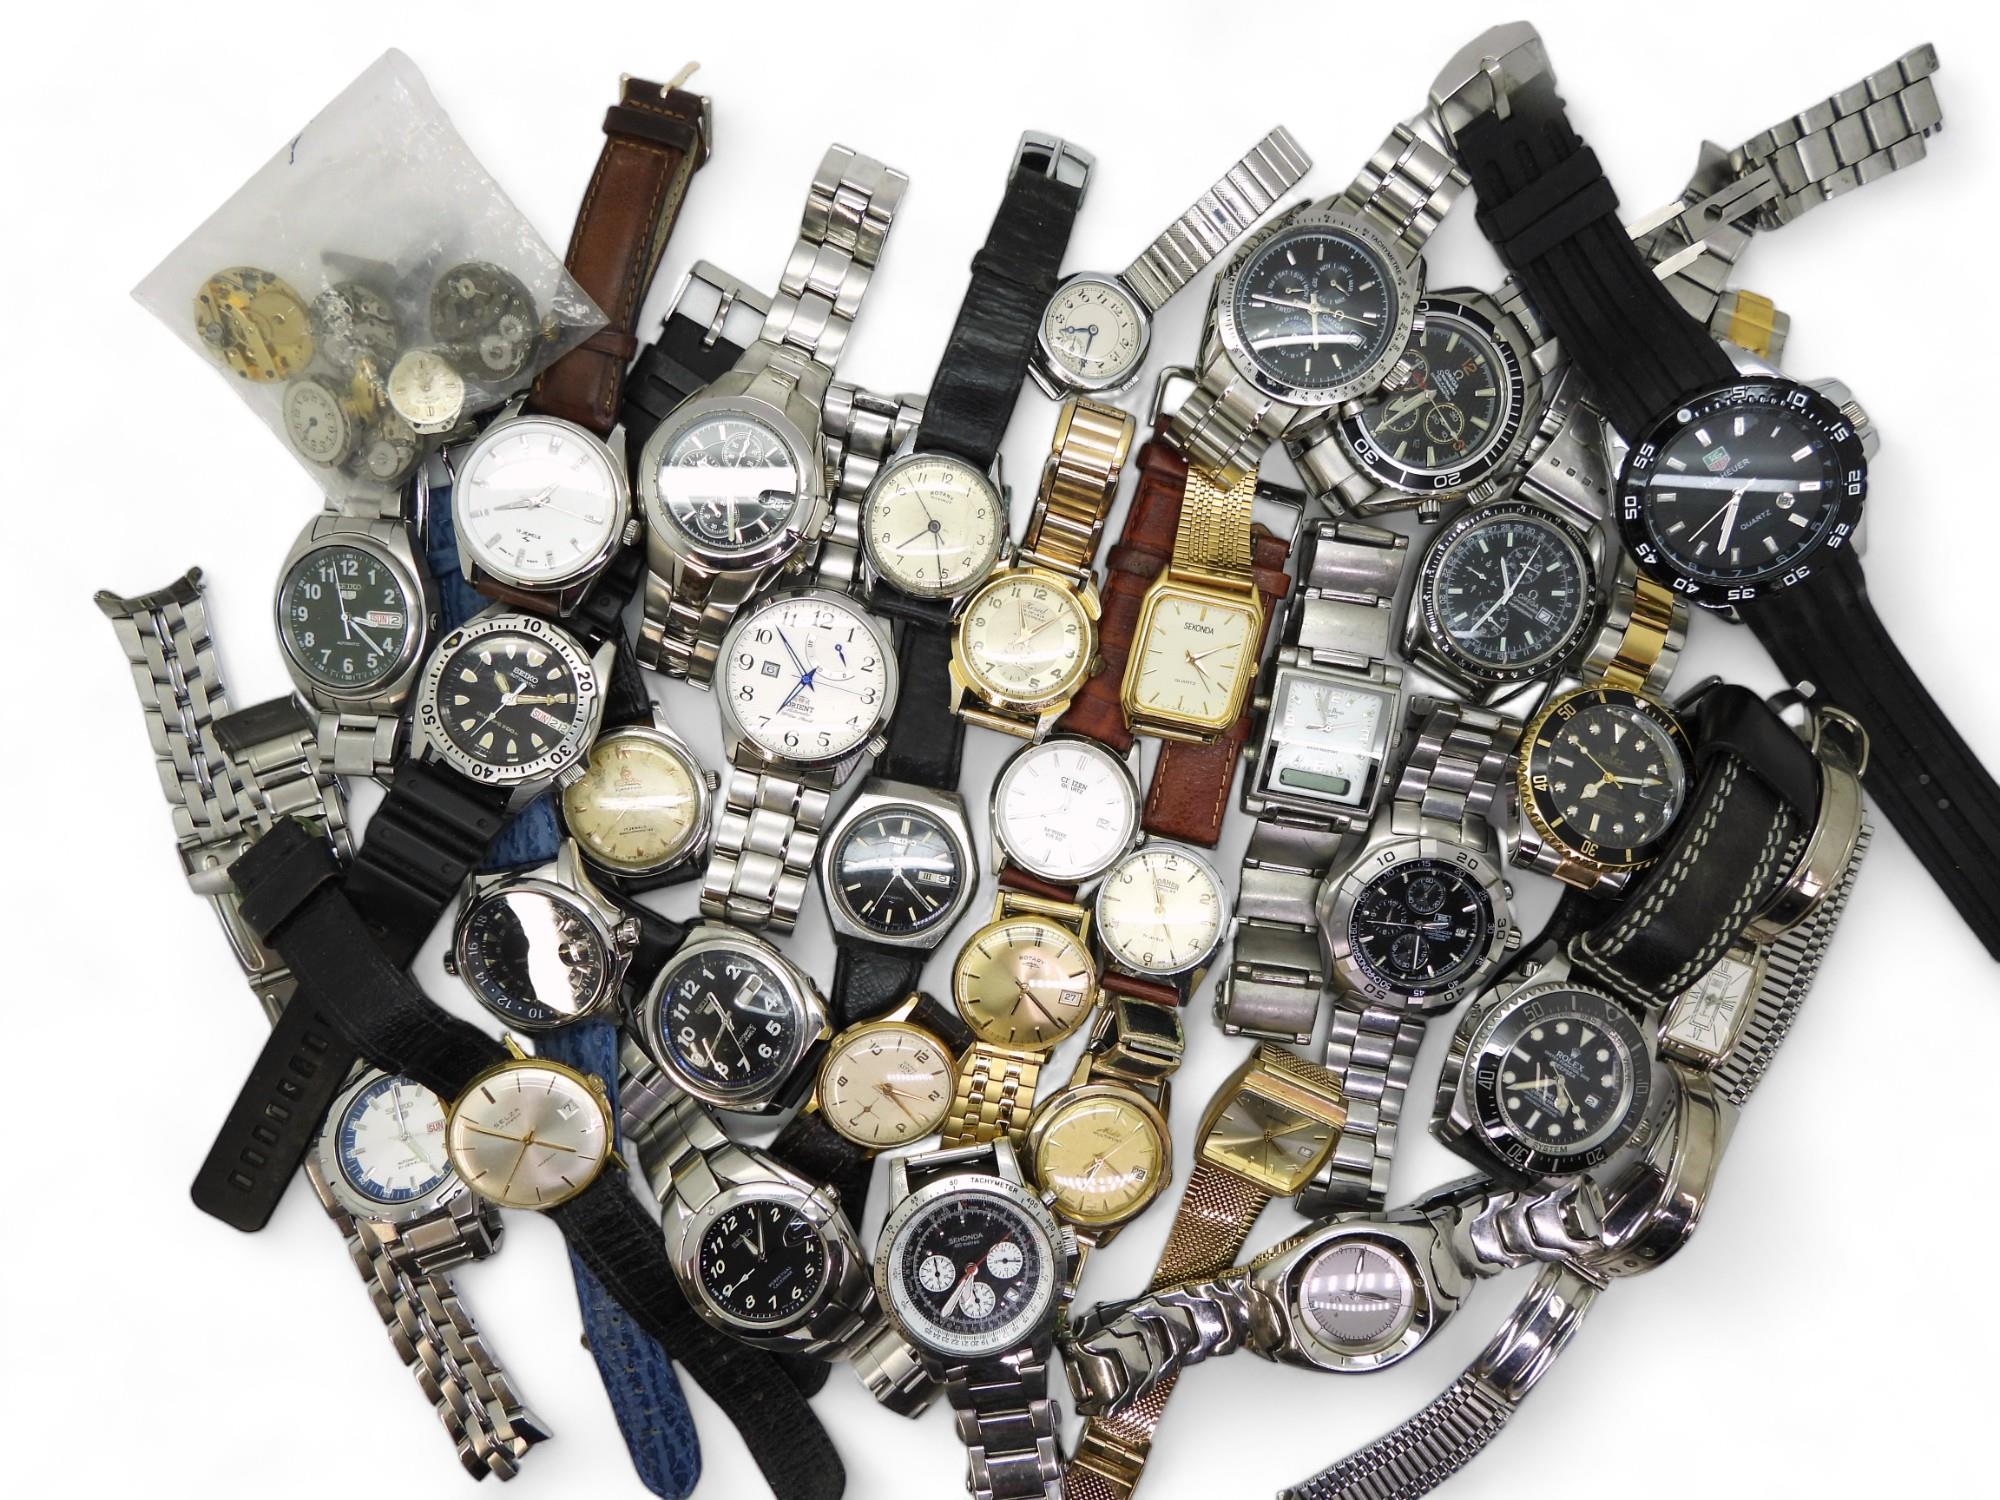 A collection of gents fashion watches to include Seiko, Roamer, Astral, Mido and replica watches.